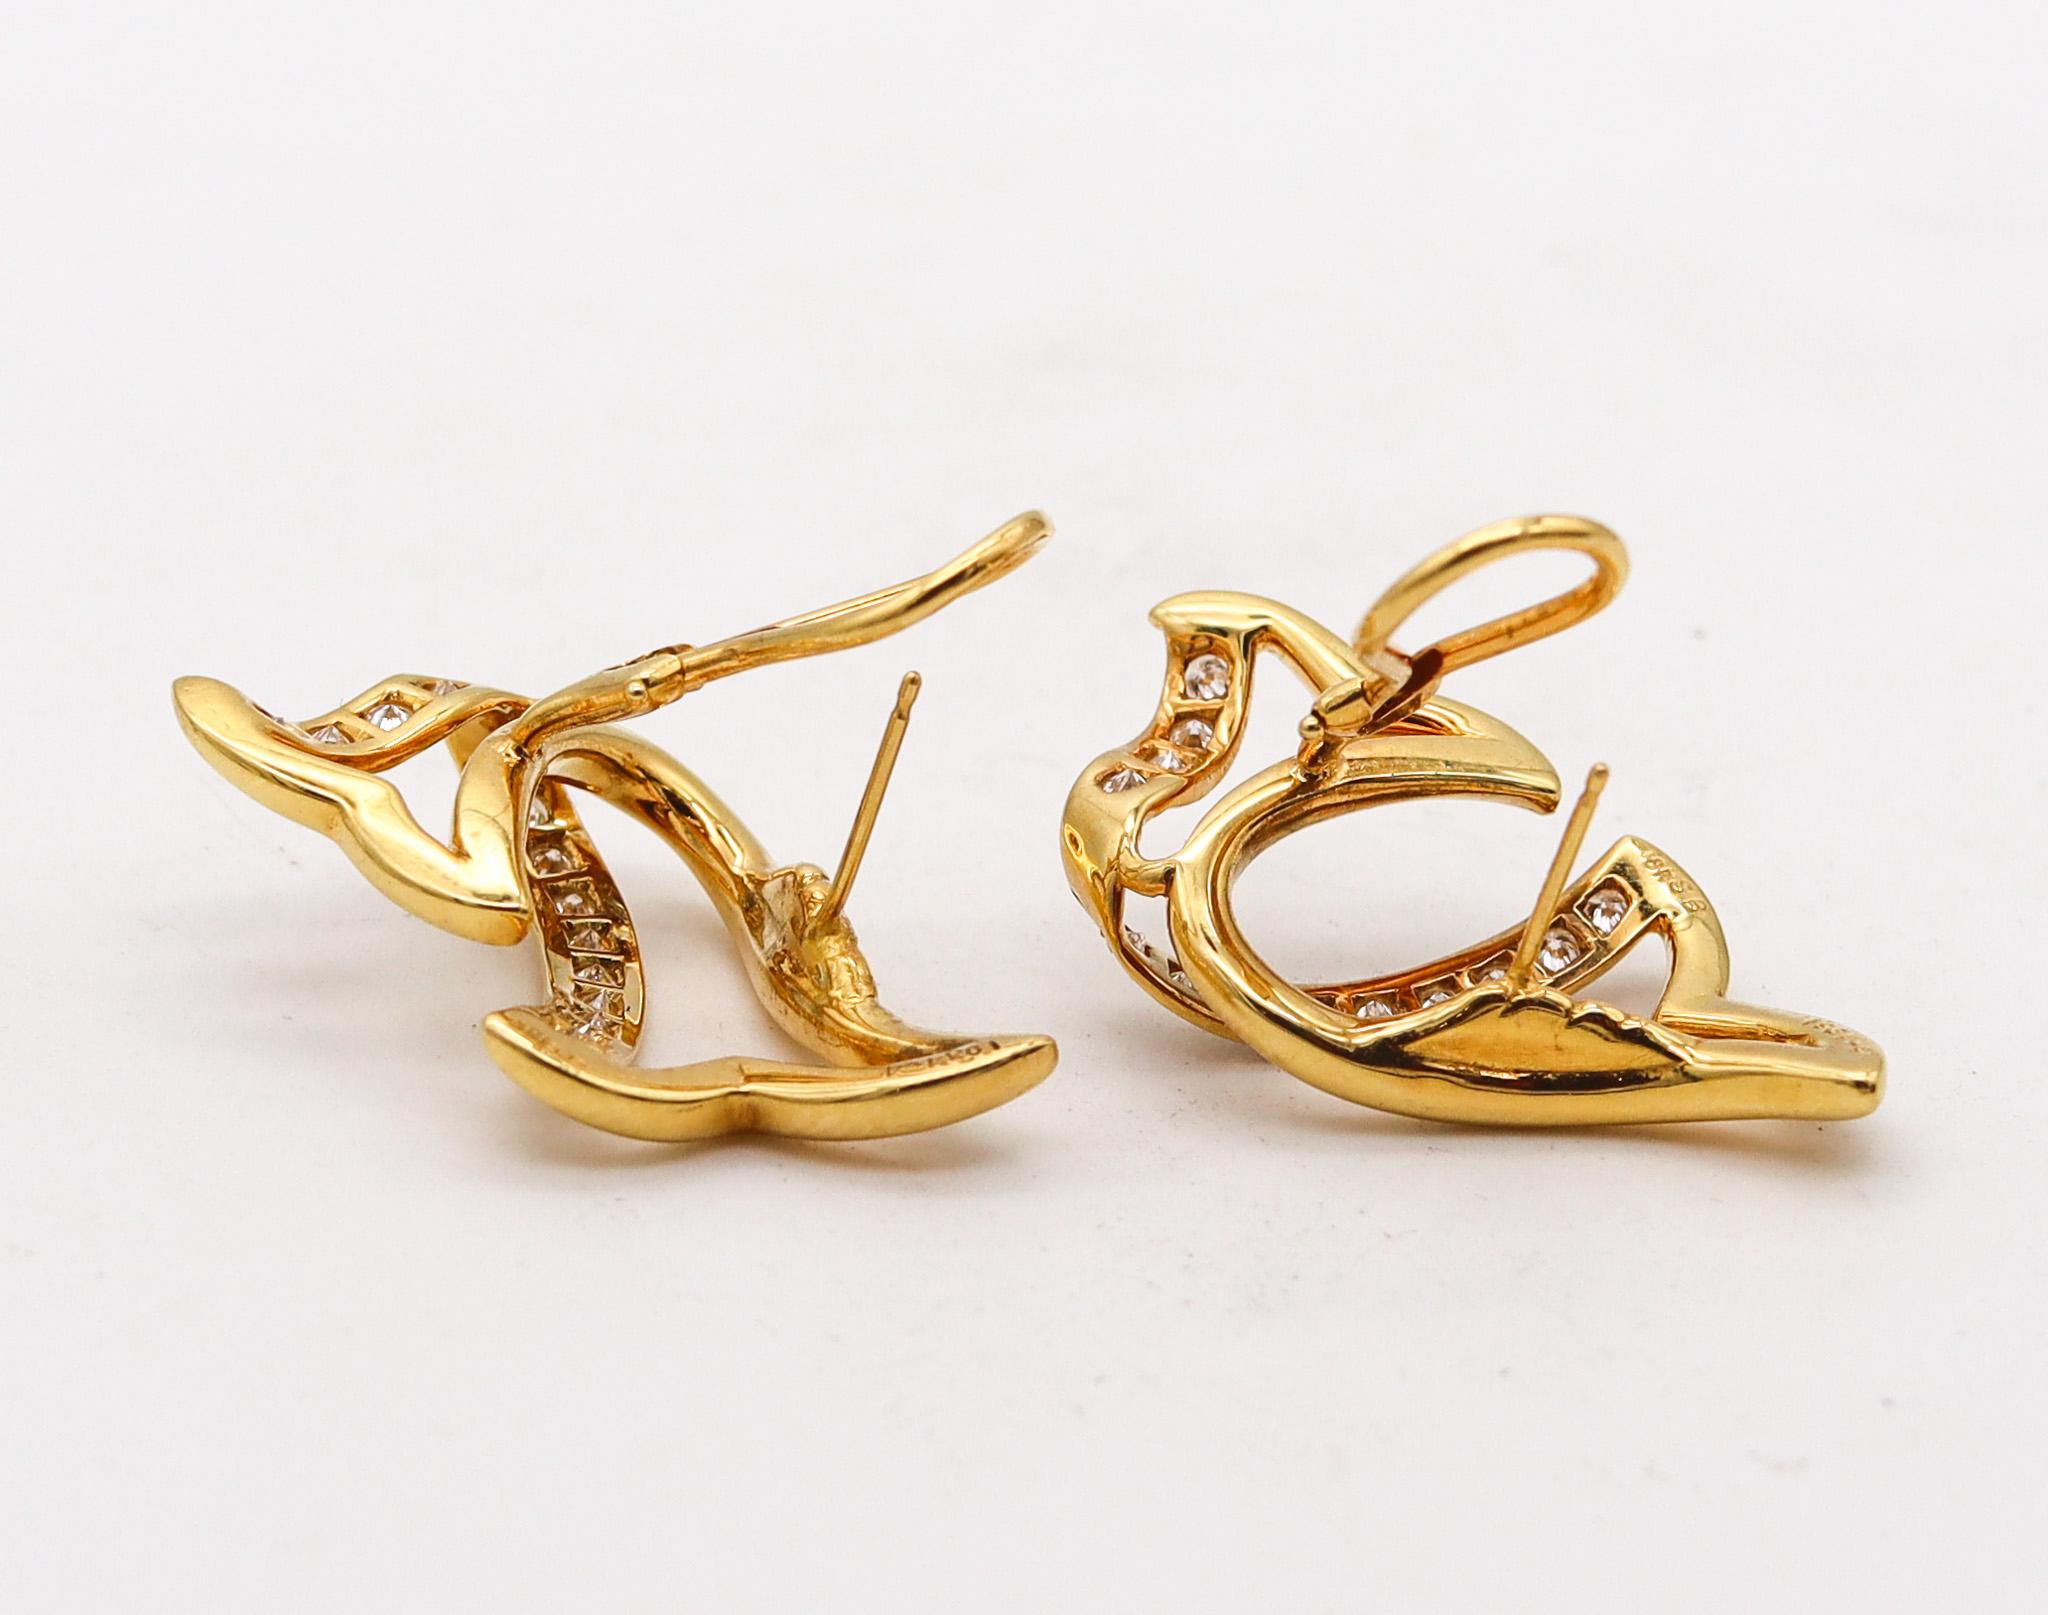 Modernist Sonia Bitton Sculptural Free Form Earrings In 18Kt Gold With 1.58 Ctw Diamonds For Sale